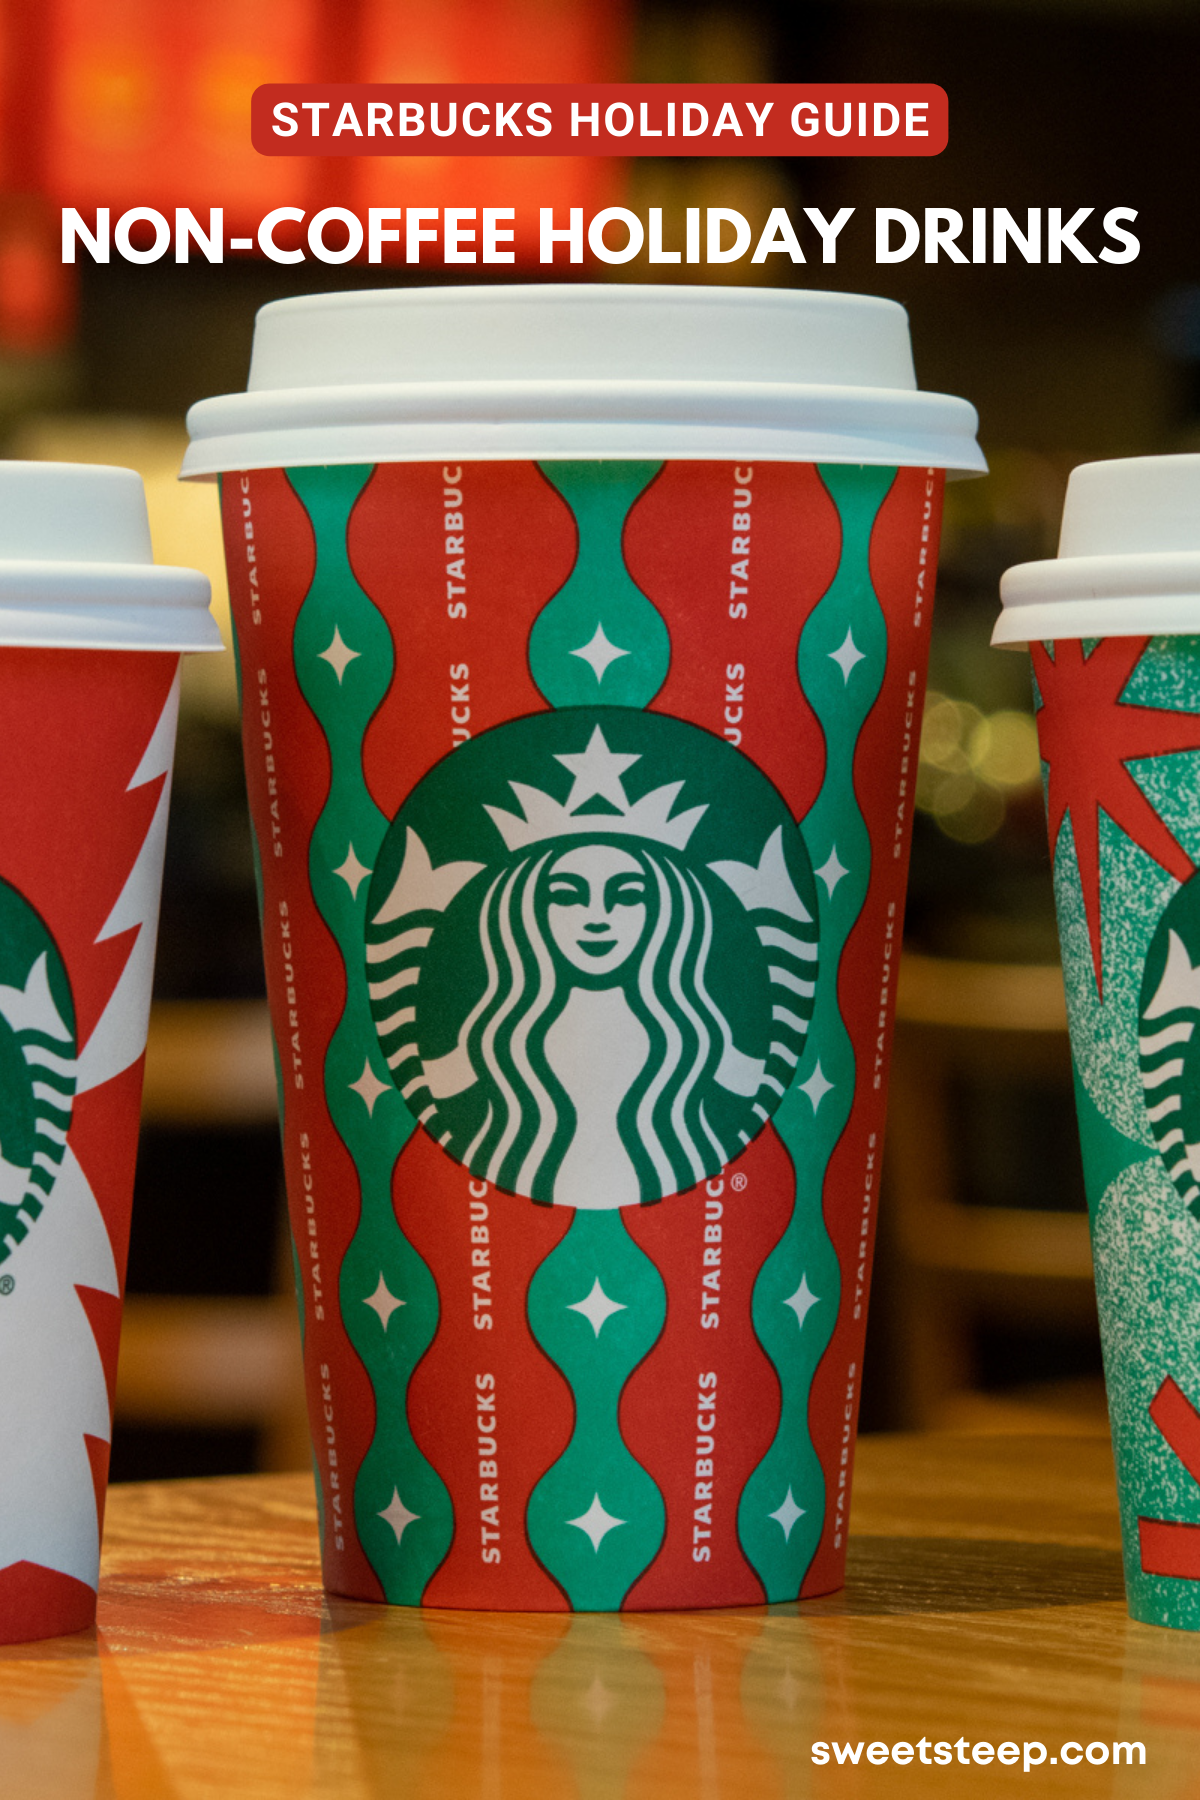 Three Starbucks holiday drinks without coffee in red holiday cups.